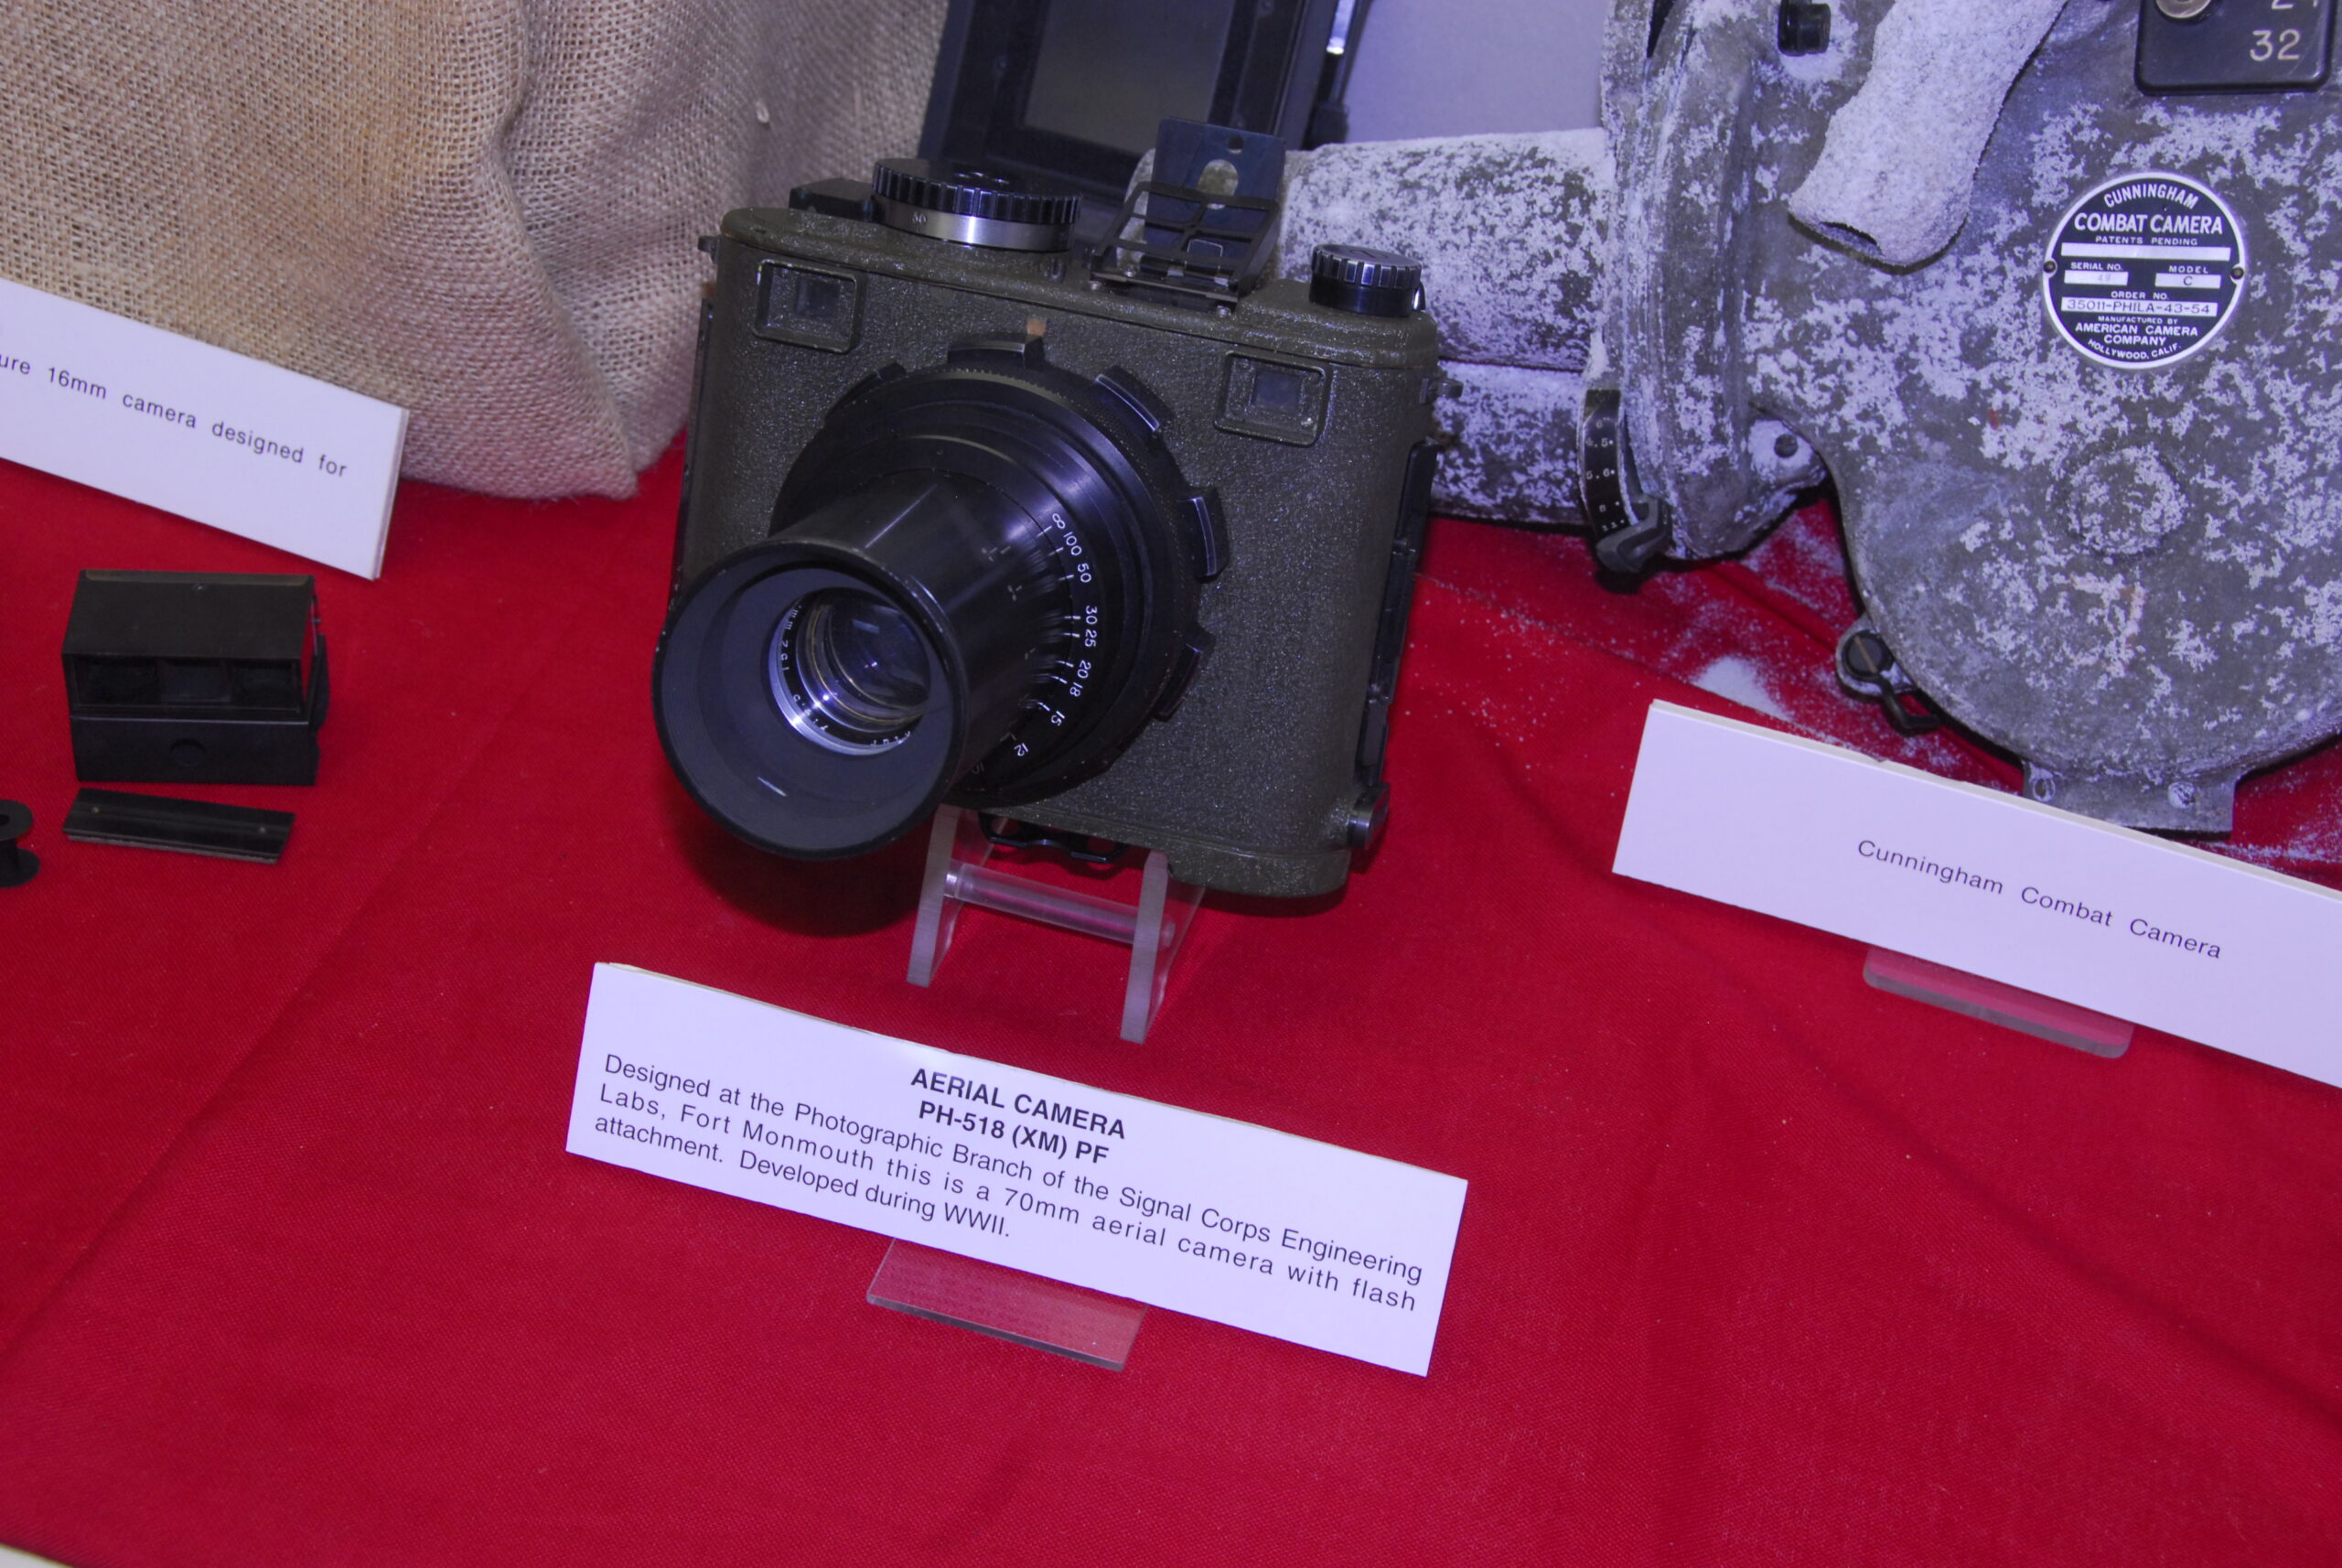 70-mm aerial camera PH-518 (XM) PF, designed at Fort Monmouth during World War II. Photo from the former CECOM History Museum at Fort Monmouth, courtesty Bob Martin.